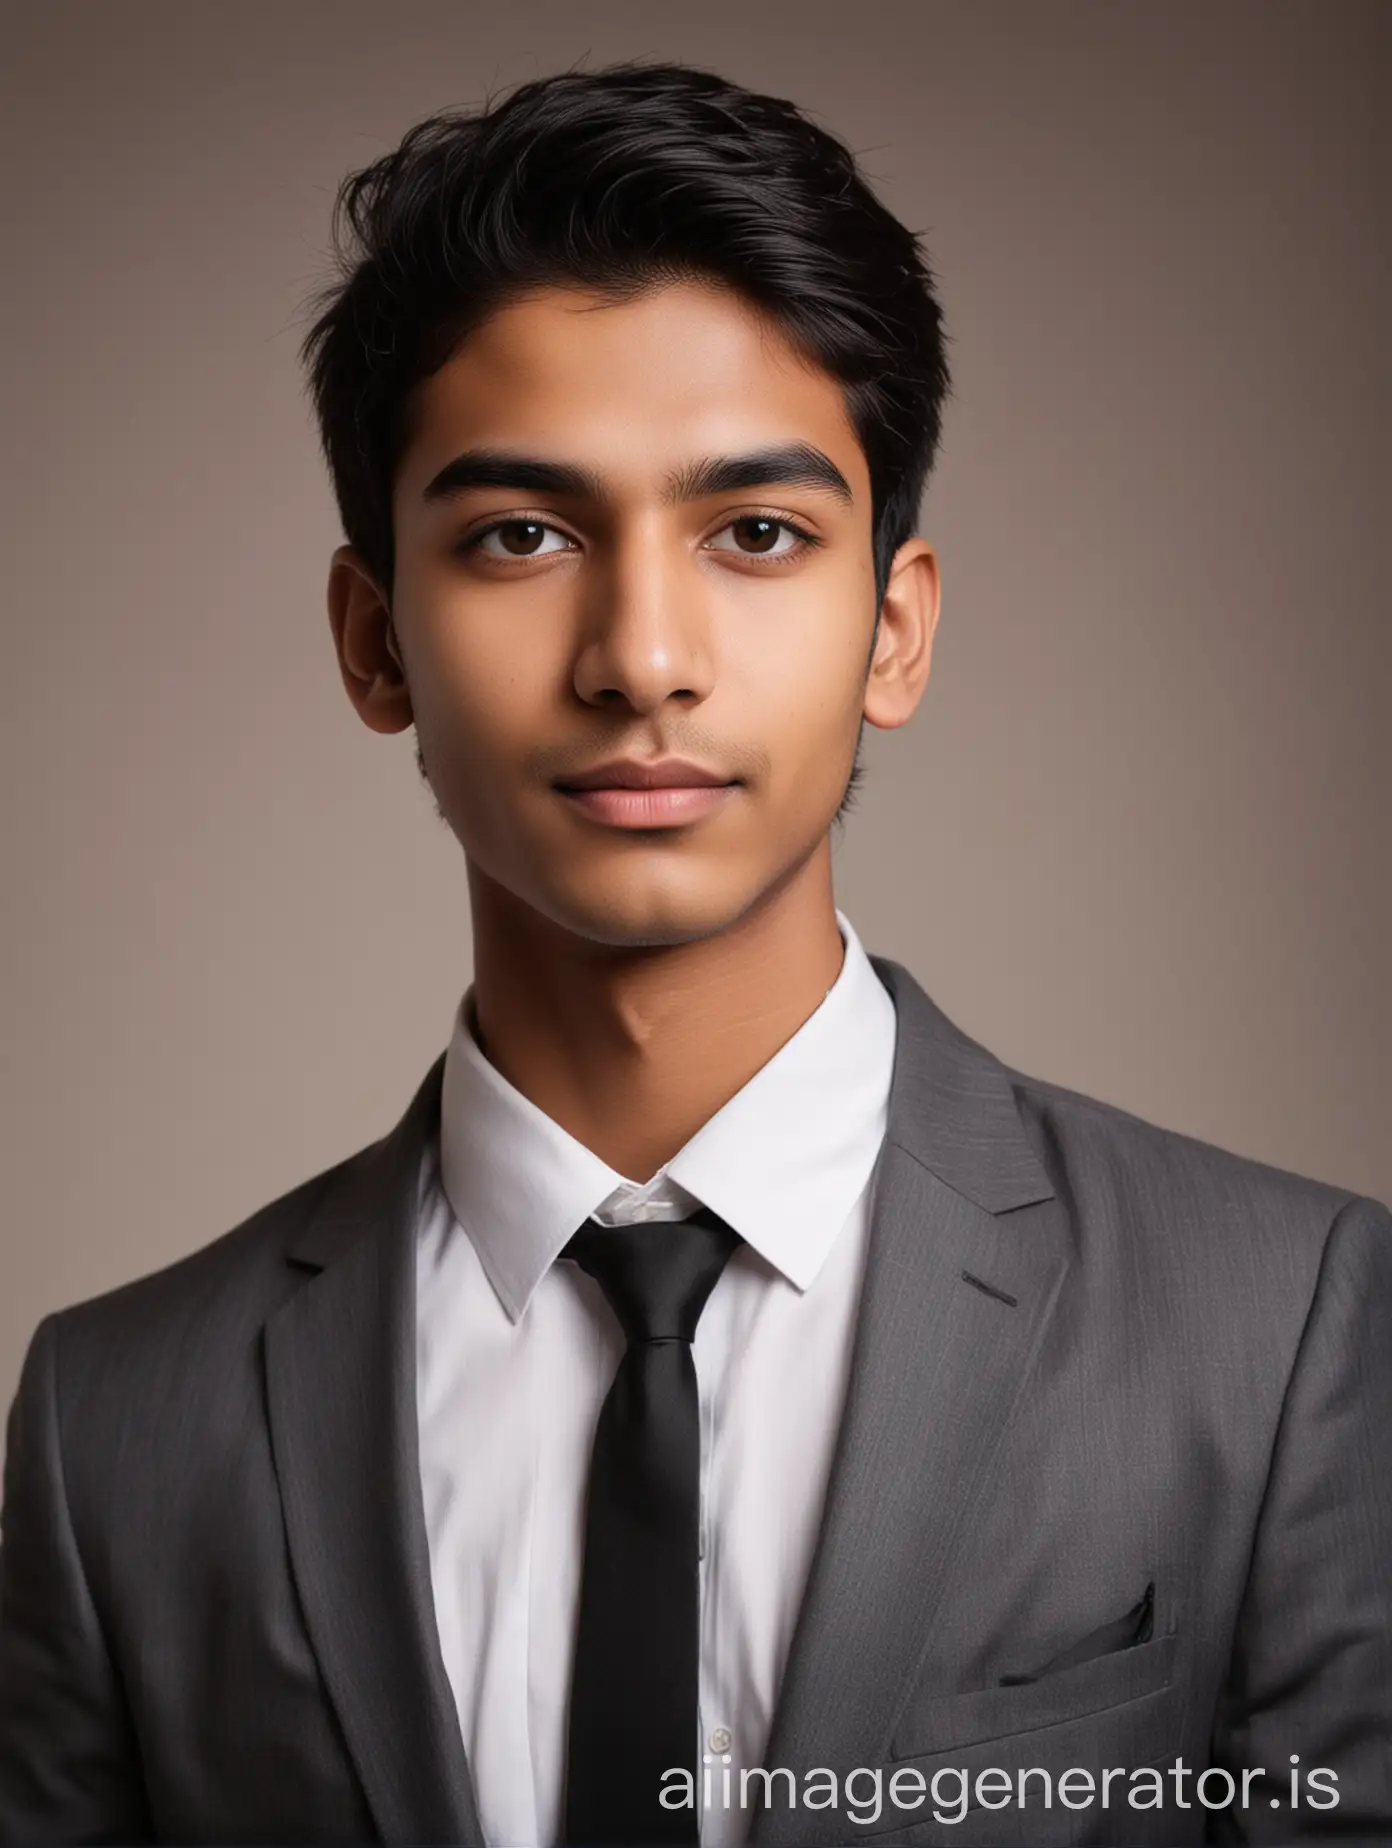 20 year old indian boy With fair skin narrow body Posing for a linkedin picture in formalsformed light in background with minimal facial hairs